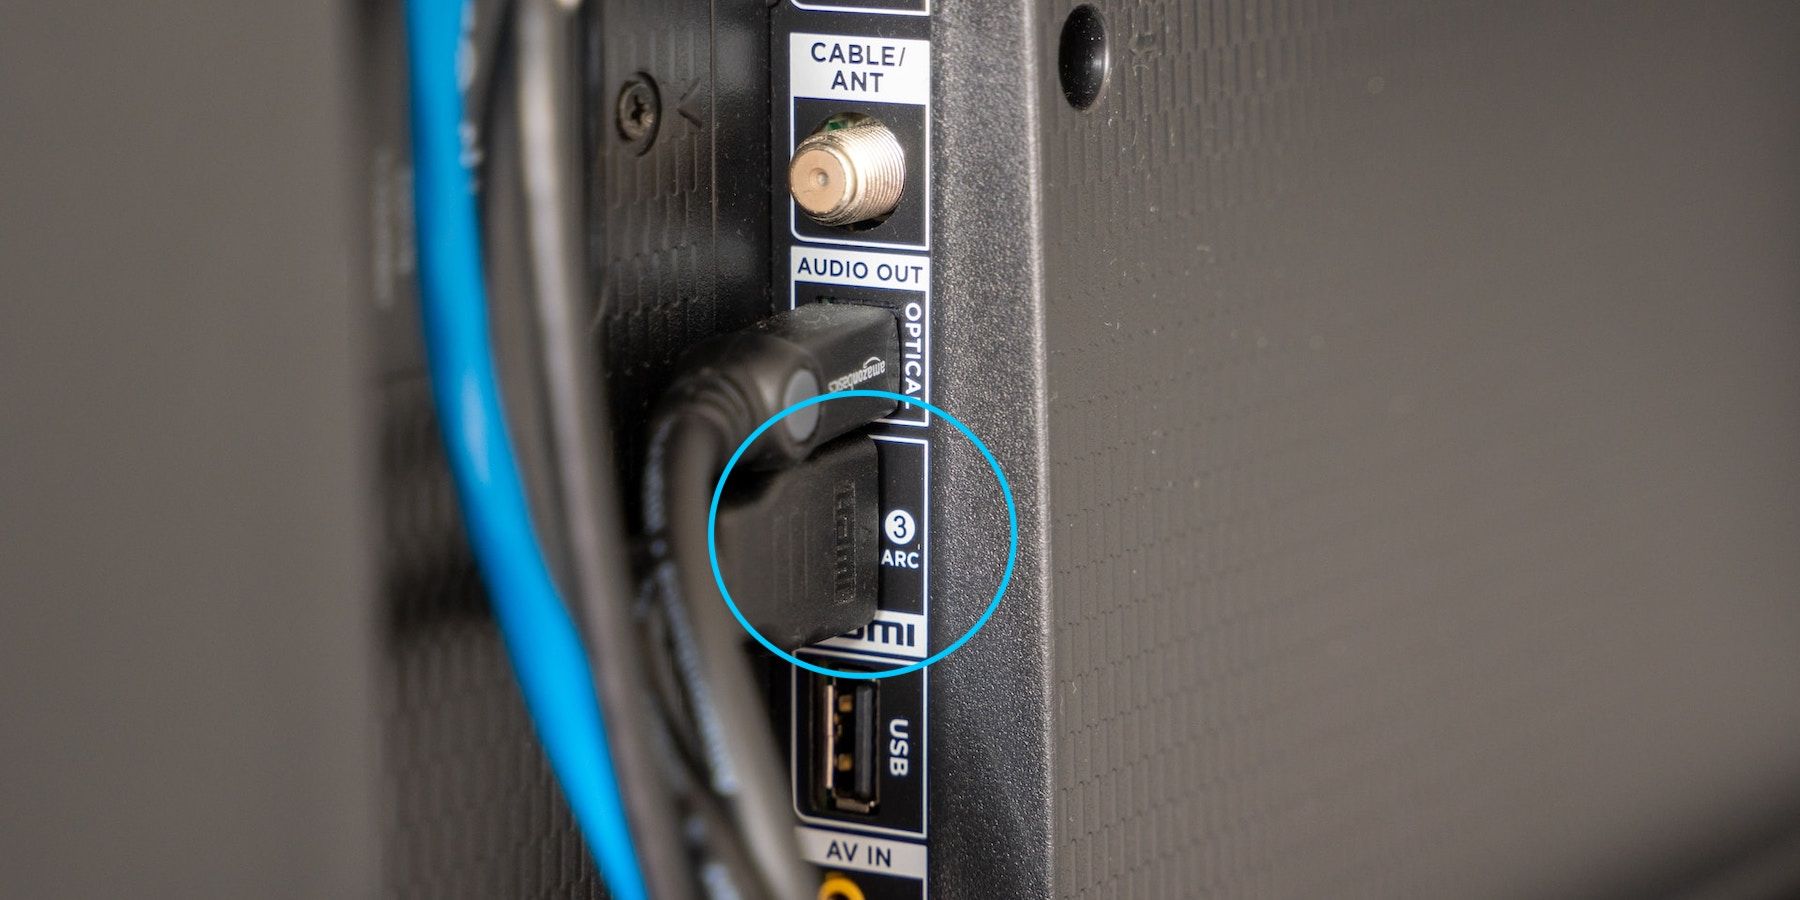 The different ports on a TV including HDMI